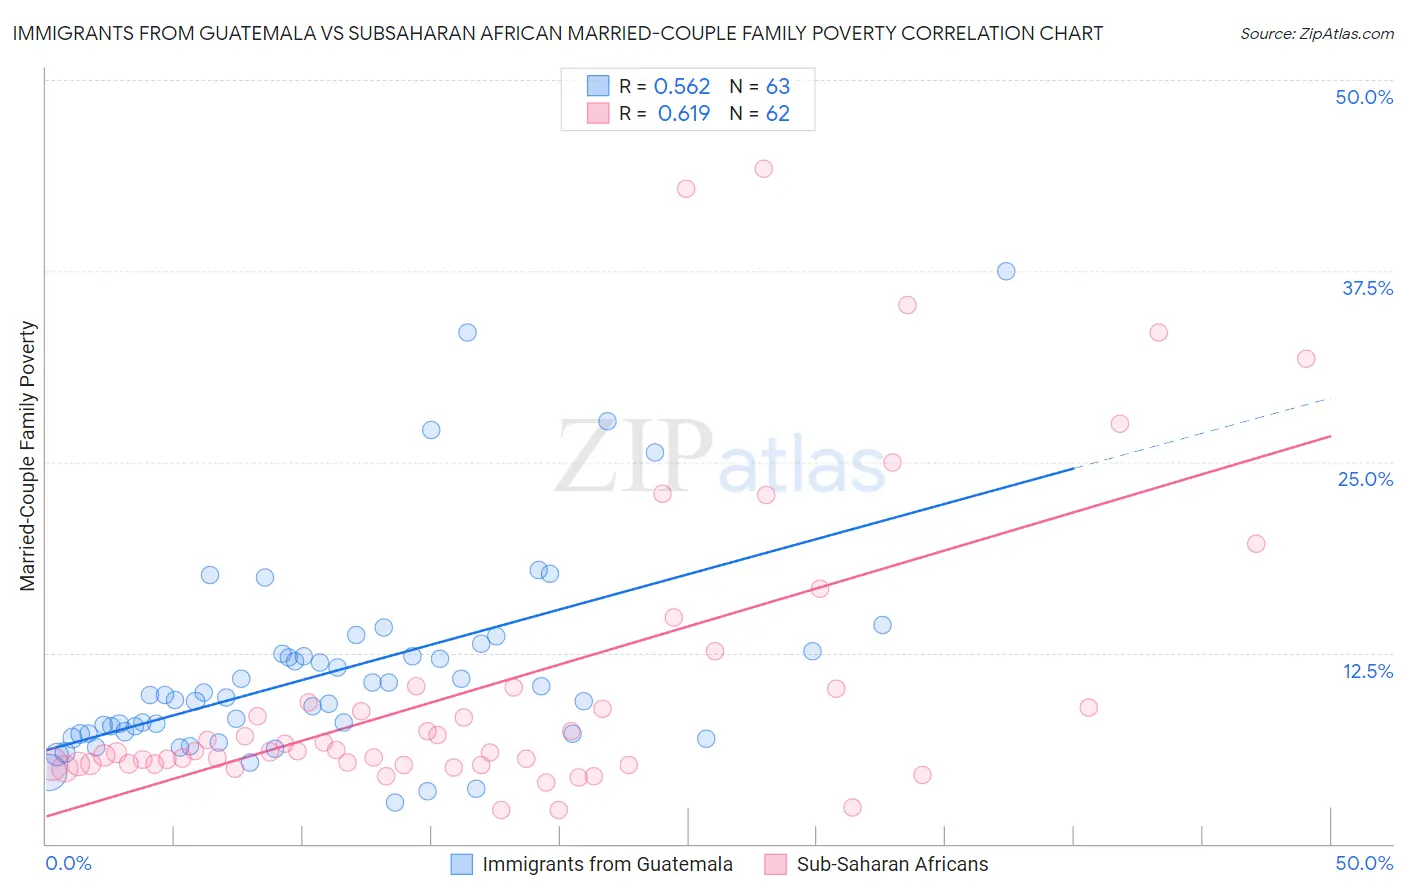 Immigrants from Guatemala vs Subsaharan African Married-Couple Family Poverty